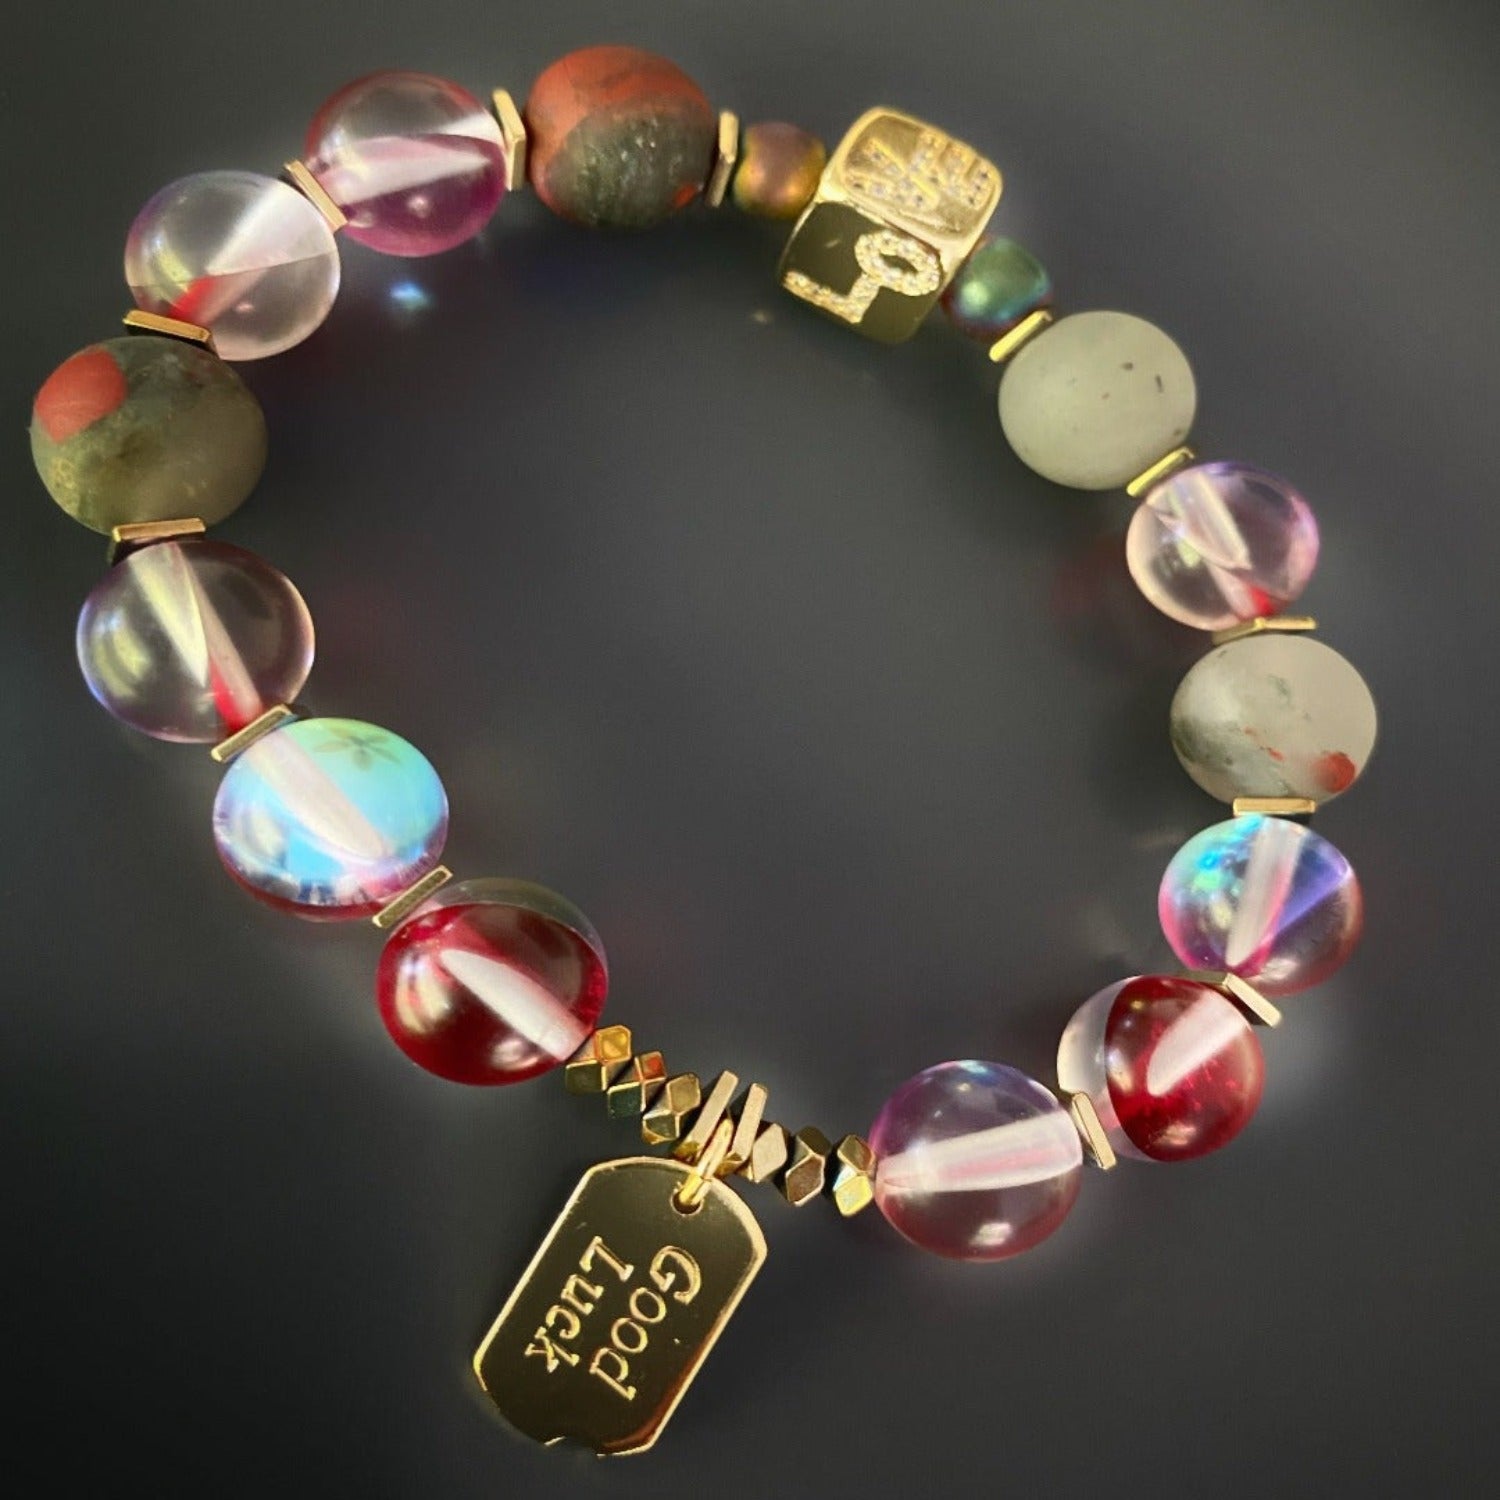 The positive vibes of the Red &amp; Gold Good Luck Bracelet, showcasing its unique blend of colors and meaningful symbolism.